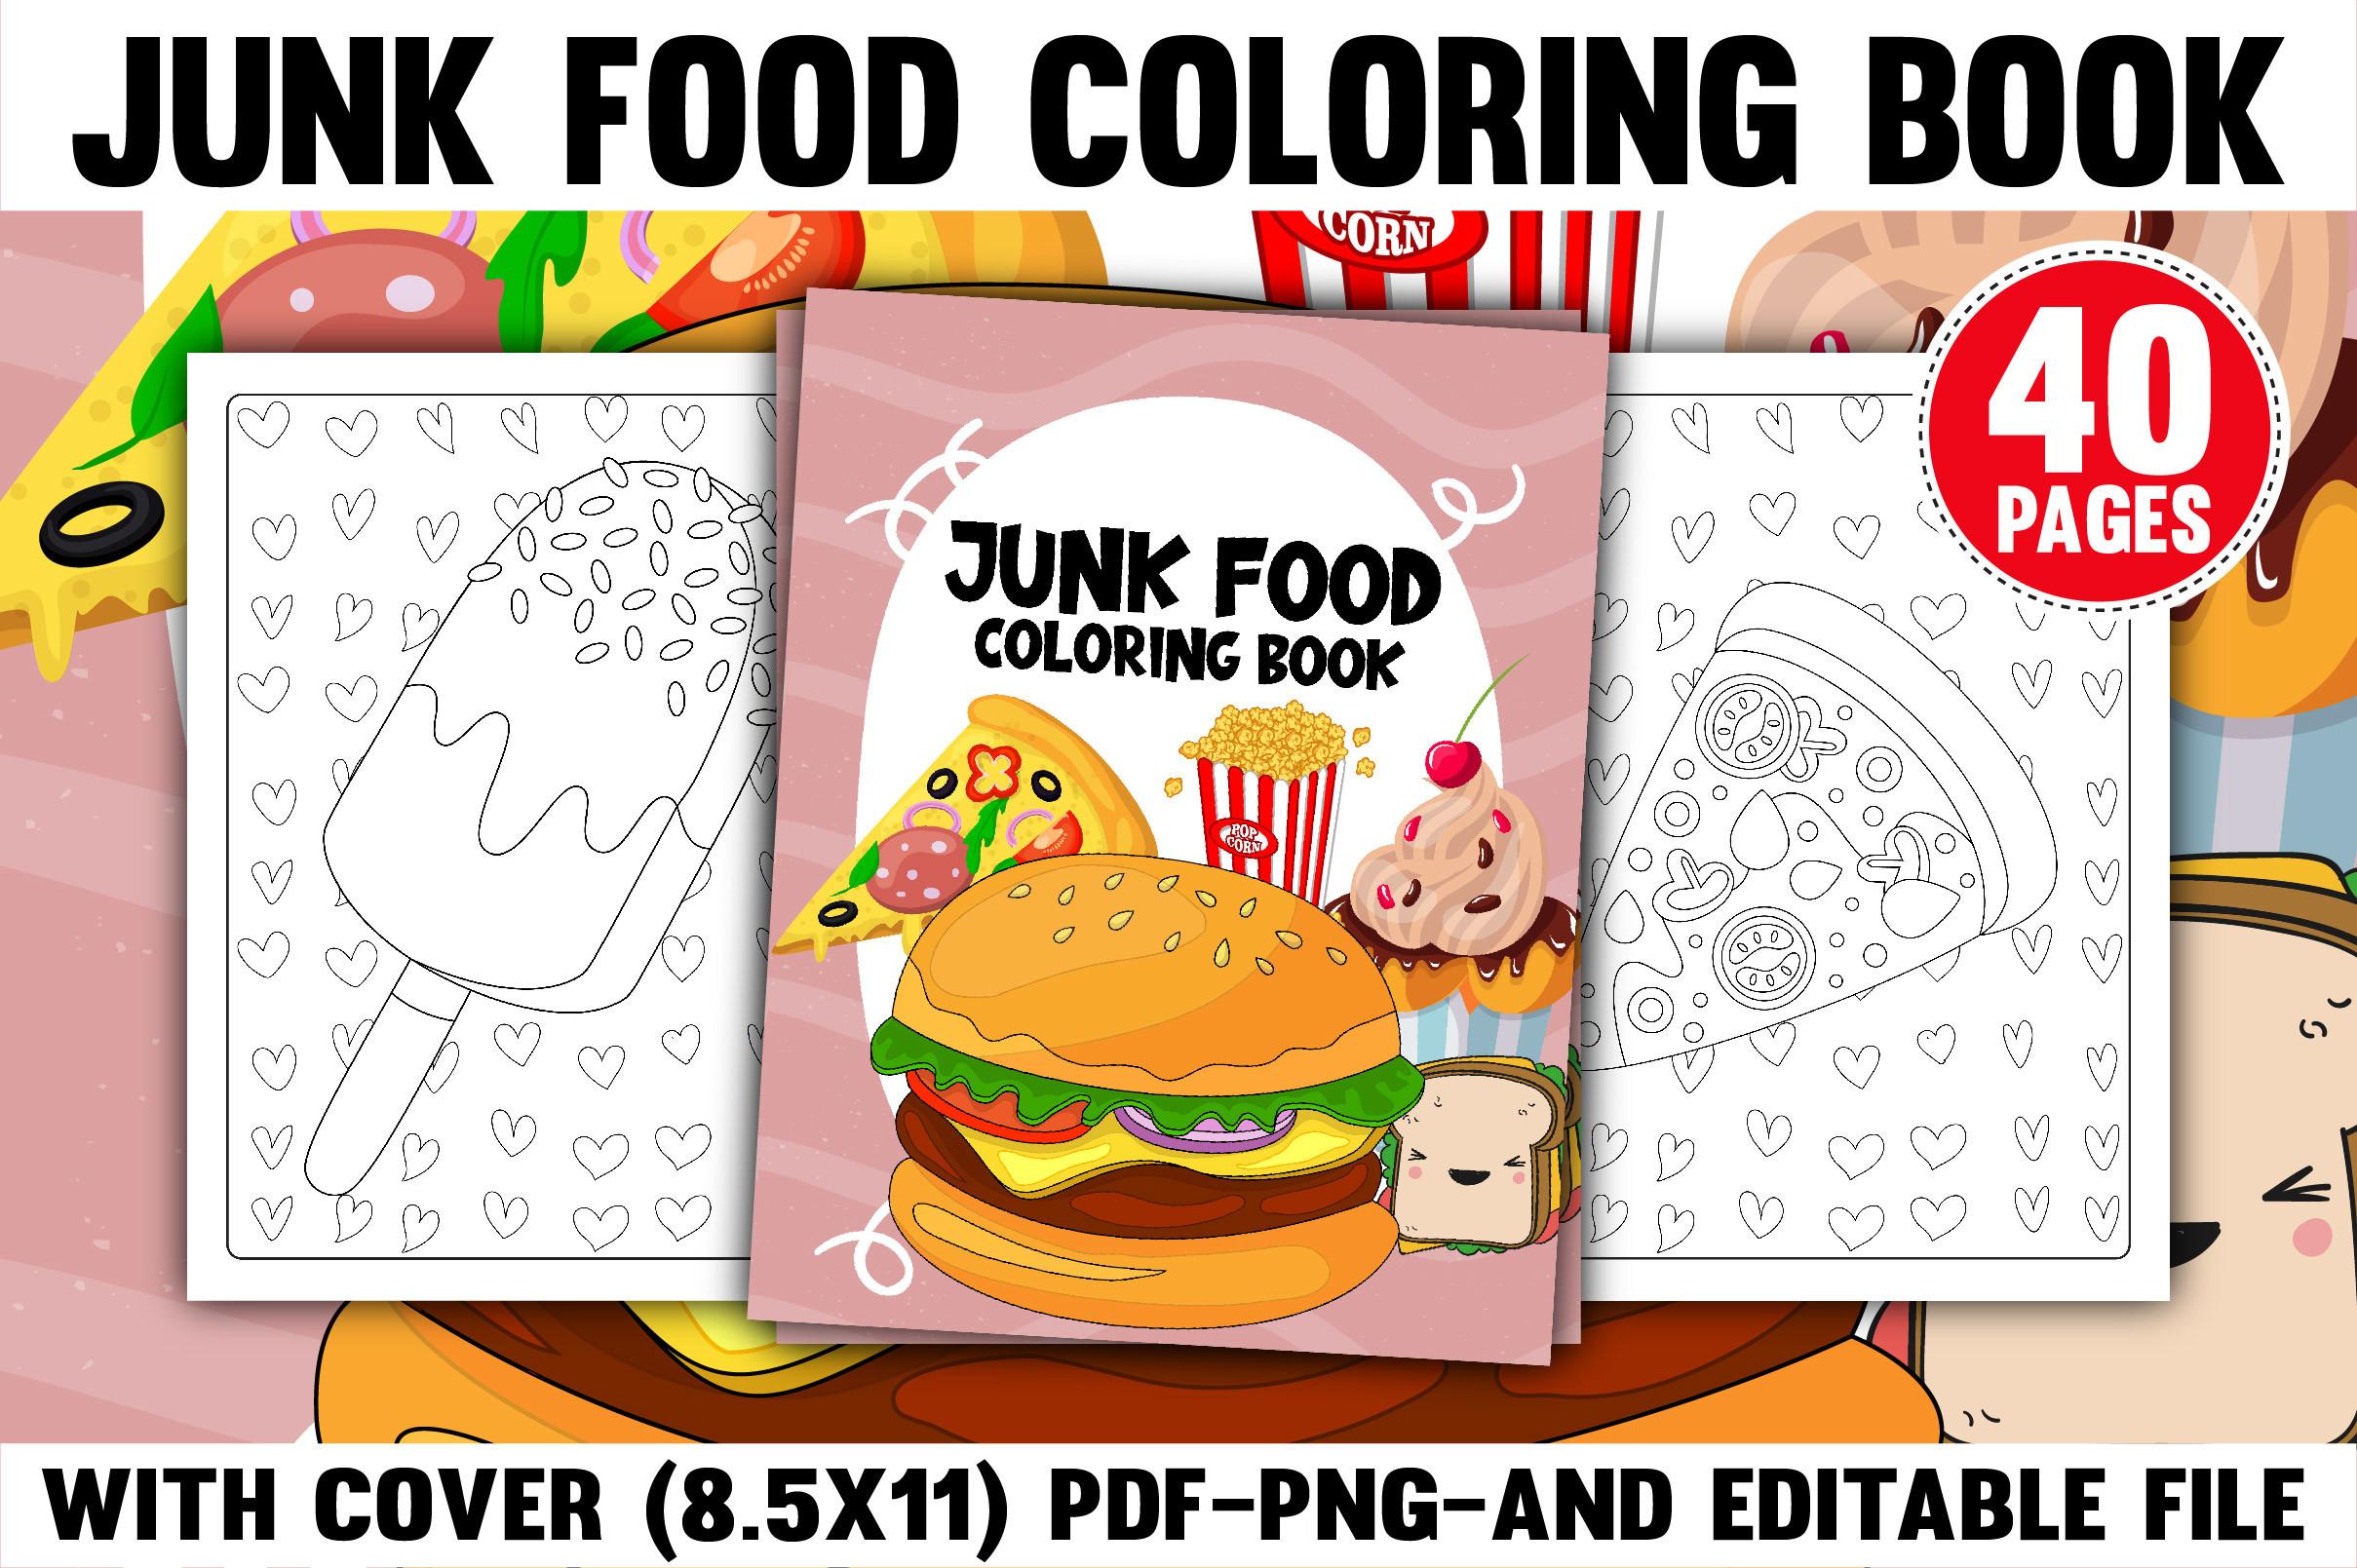 Fast Food Coloring Book & Cover Design